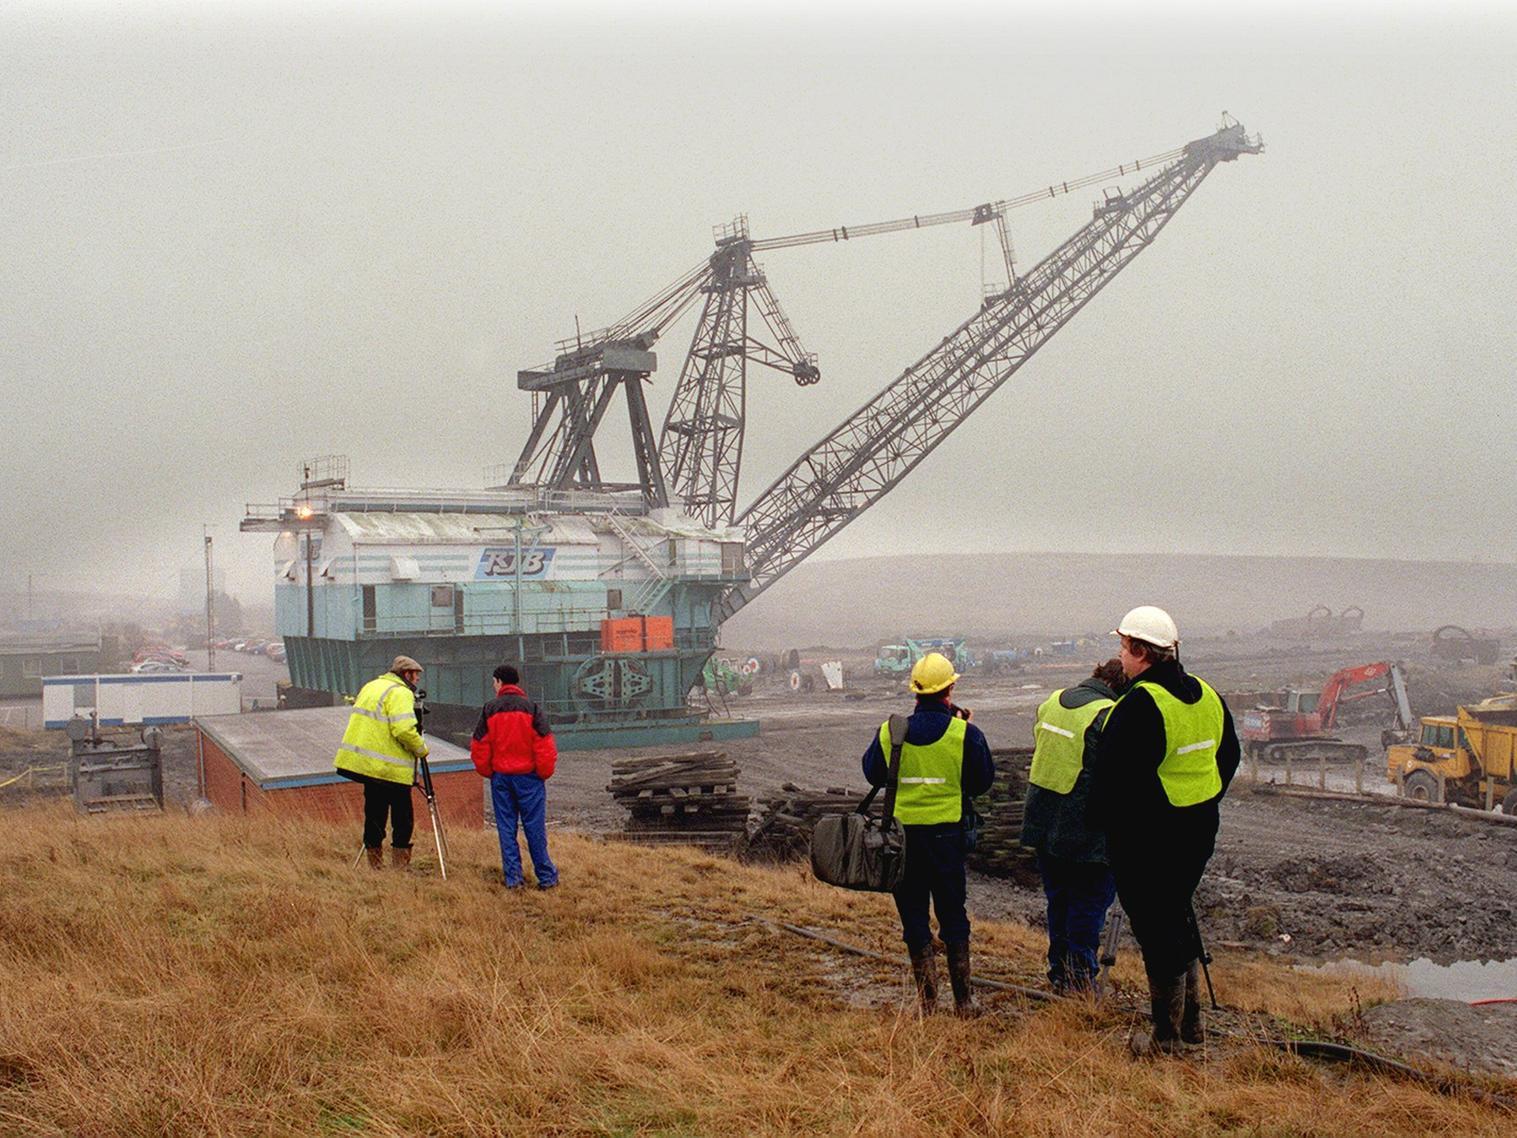 A giant 1,200 tonnes walking dragline excavator at St Aidan's opencast site near Swillington was brought back to life after ten years.